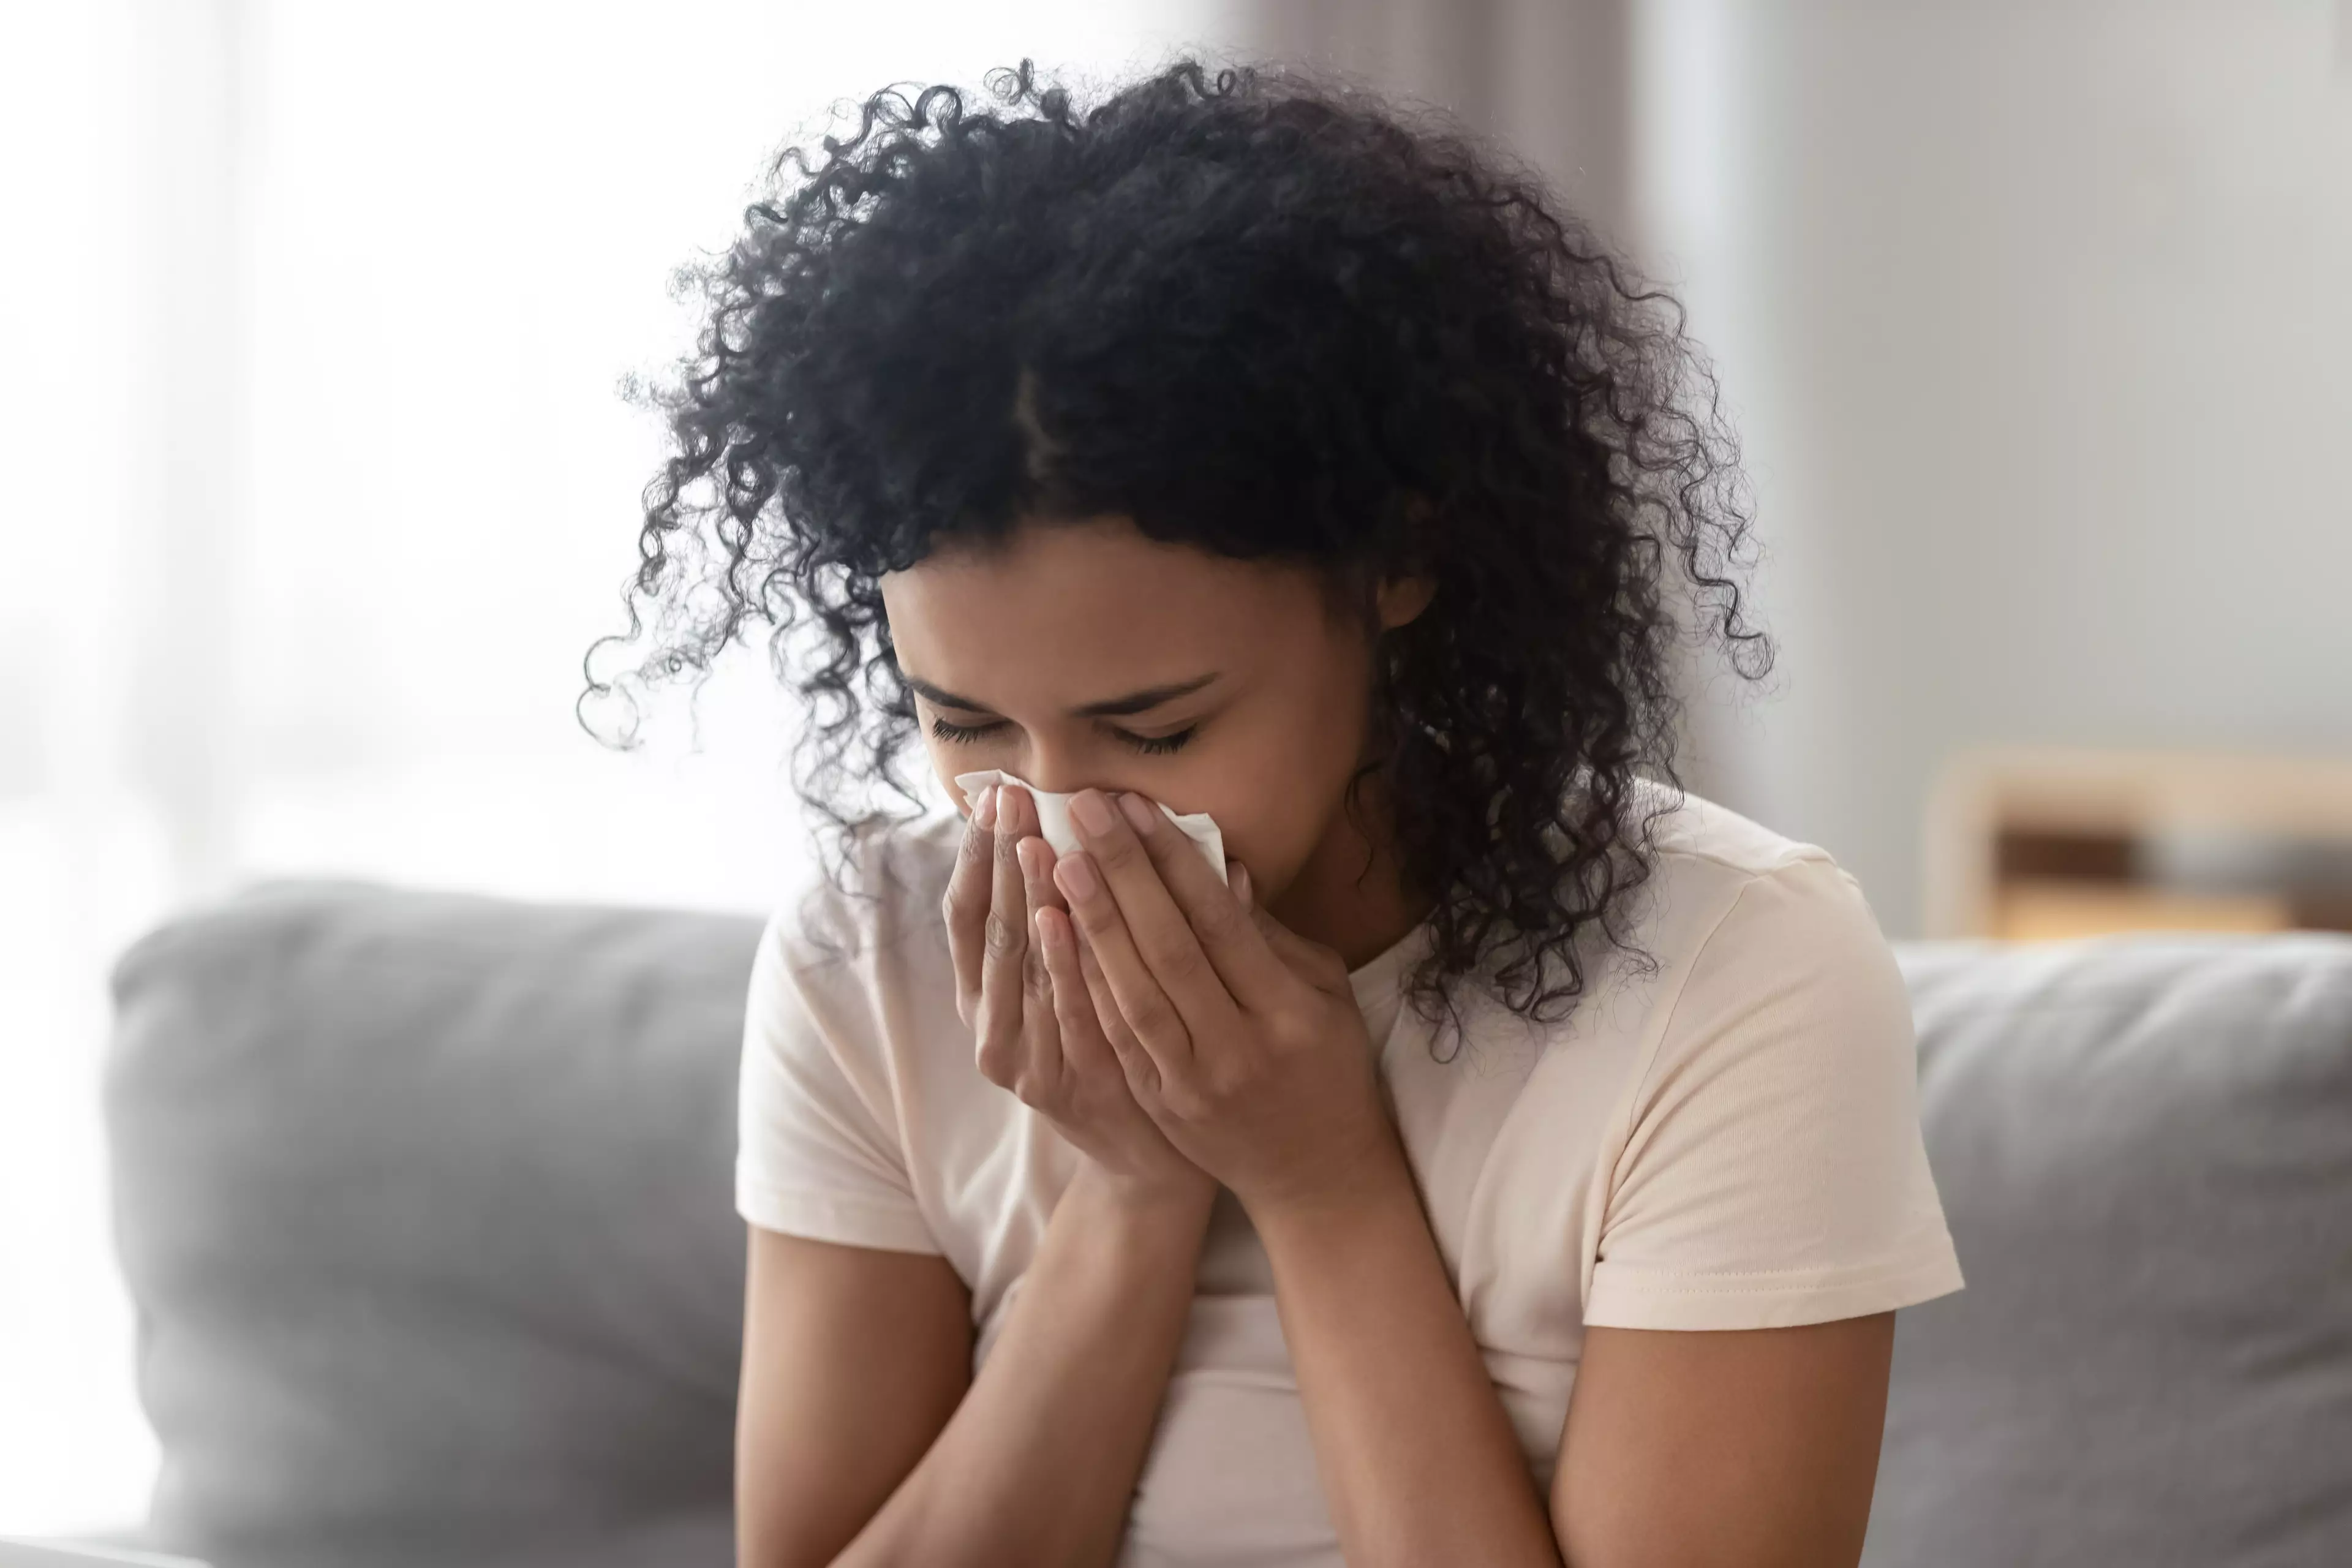 Breathing through your mouth can be tricky when you're contending with the symptoms of hay fever (